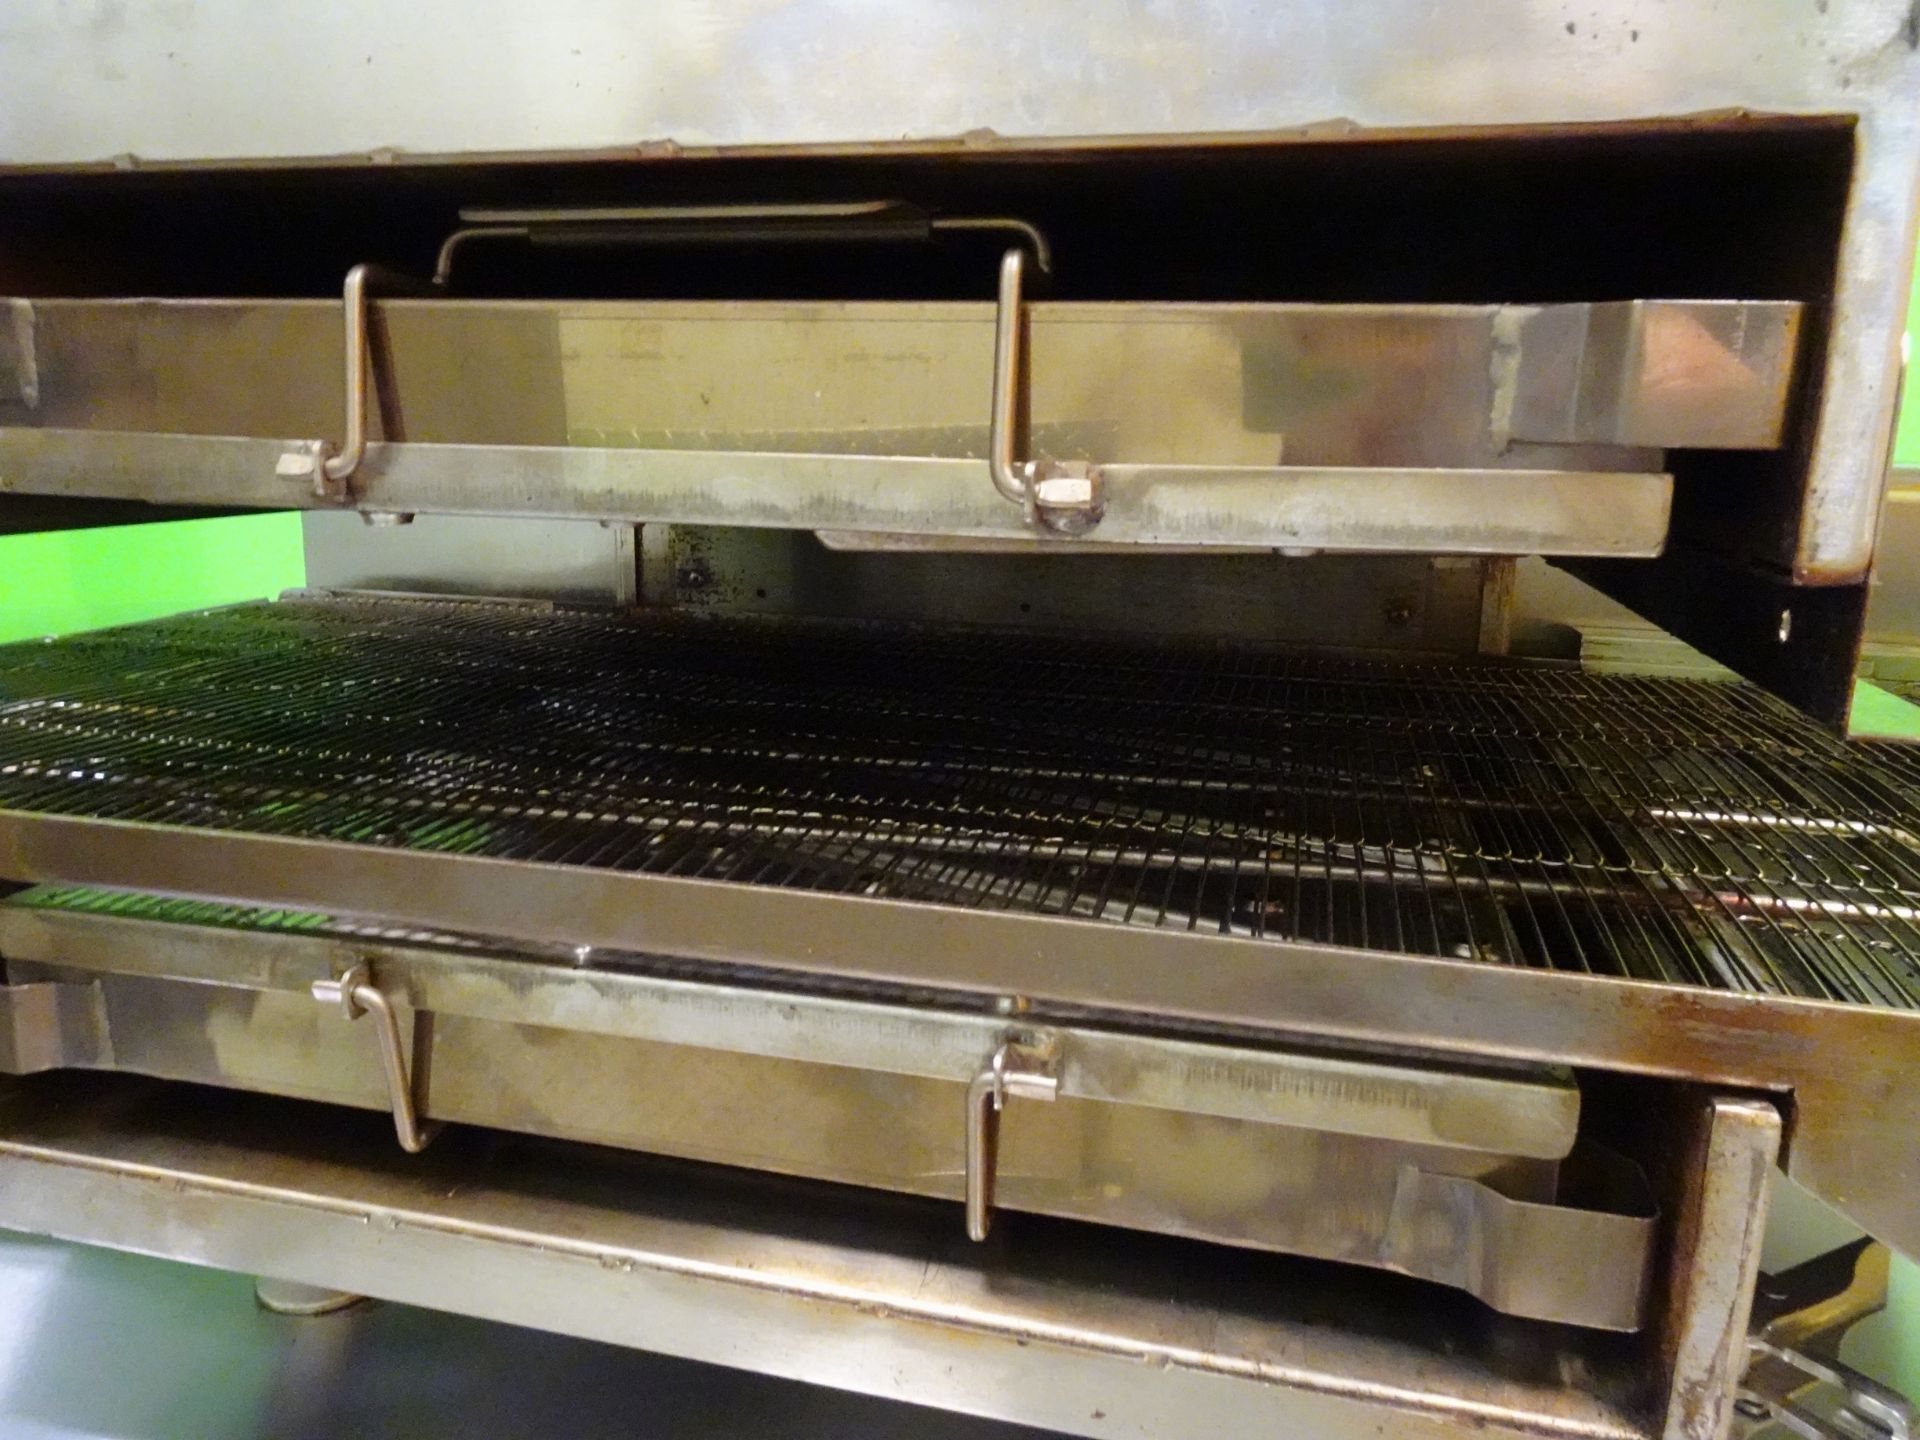 Turbo Chef high H Conveyor Commercial Oven S/N: HHC1618ED01082 - Image 12 of 13